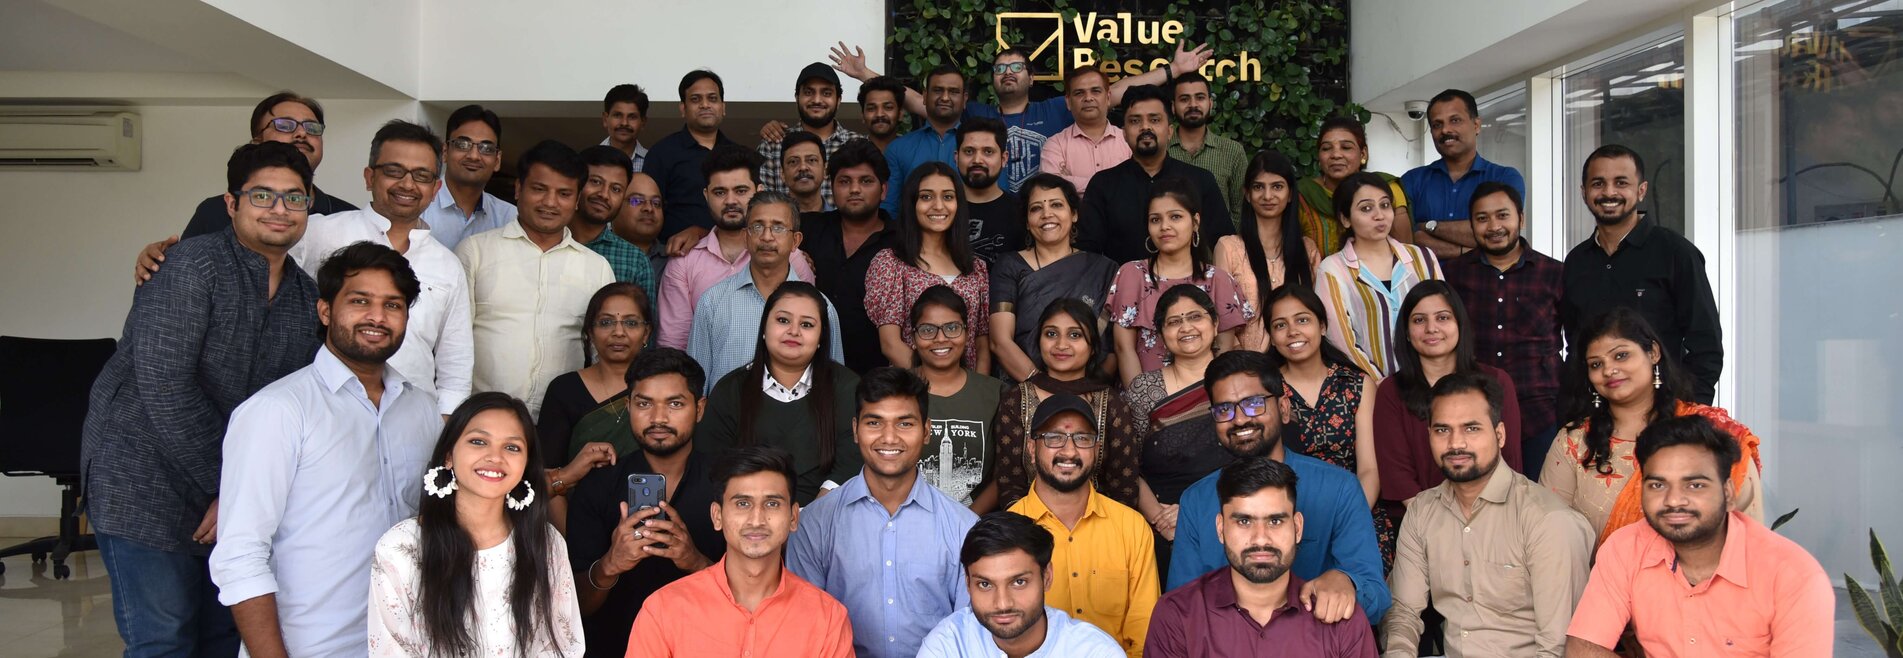 value-research-team